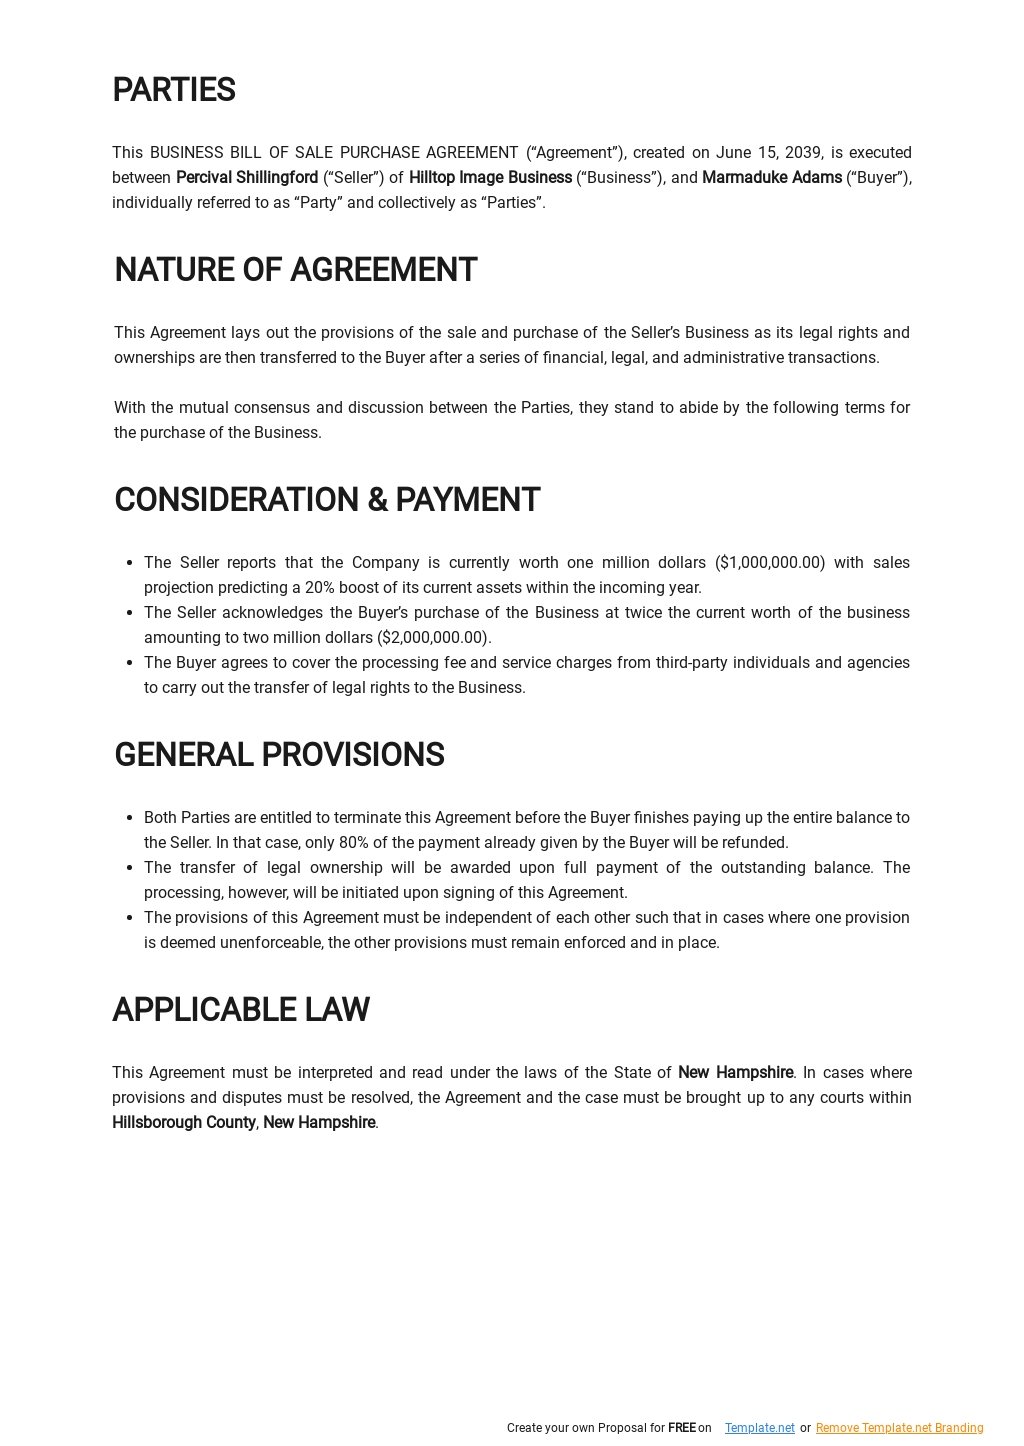 Business Bill of Sale Purchase Agreement Template 1.jpe